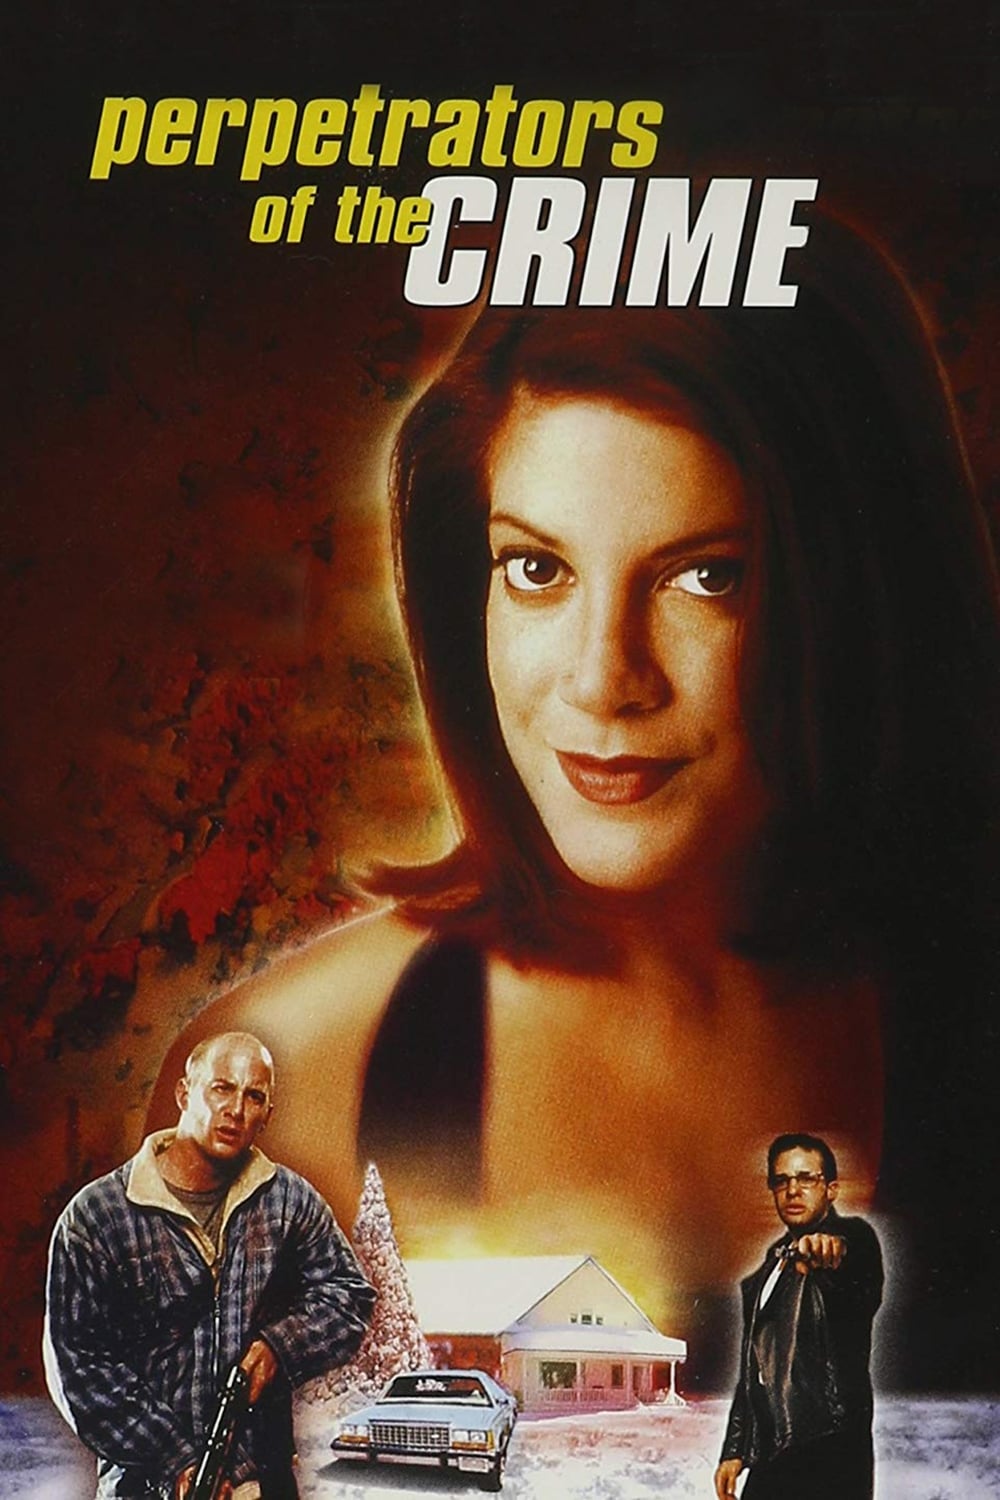 Perpetrators of the Crime (2000)